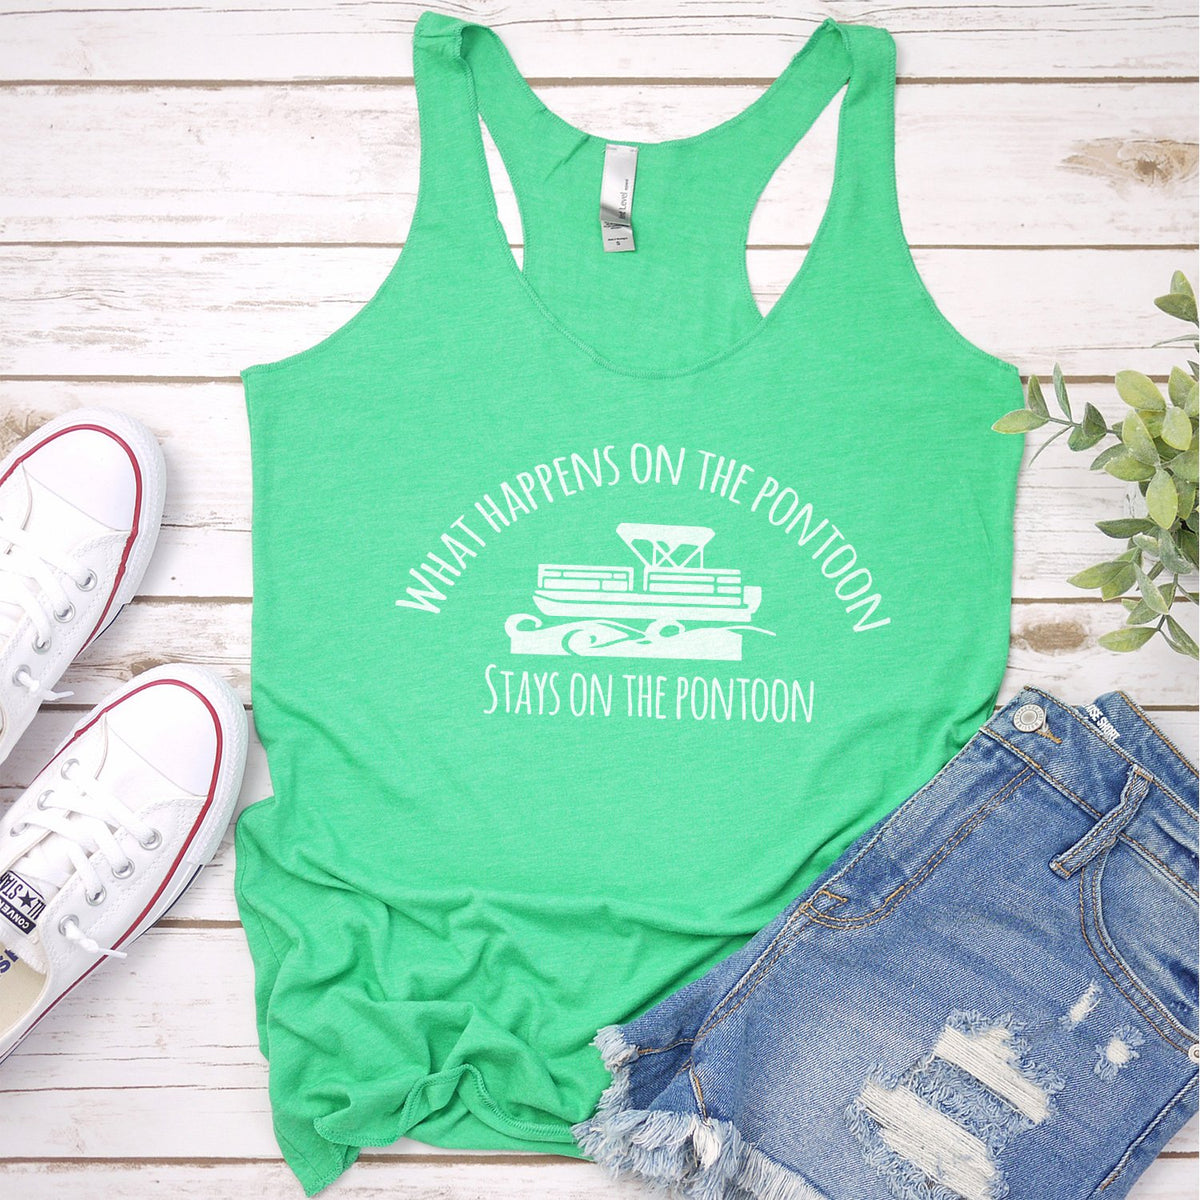 What Happens on the Pontoon Stays on the Pontoon - Tank Top Racerback